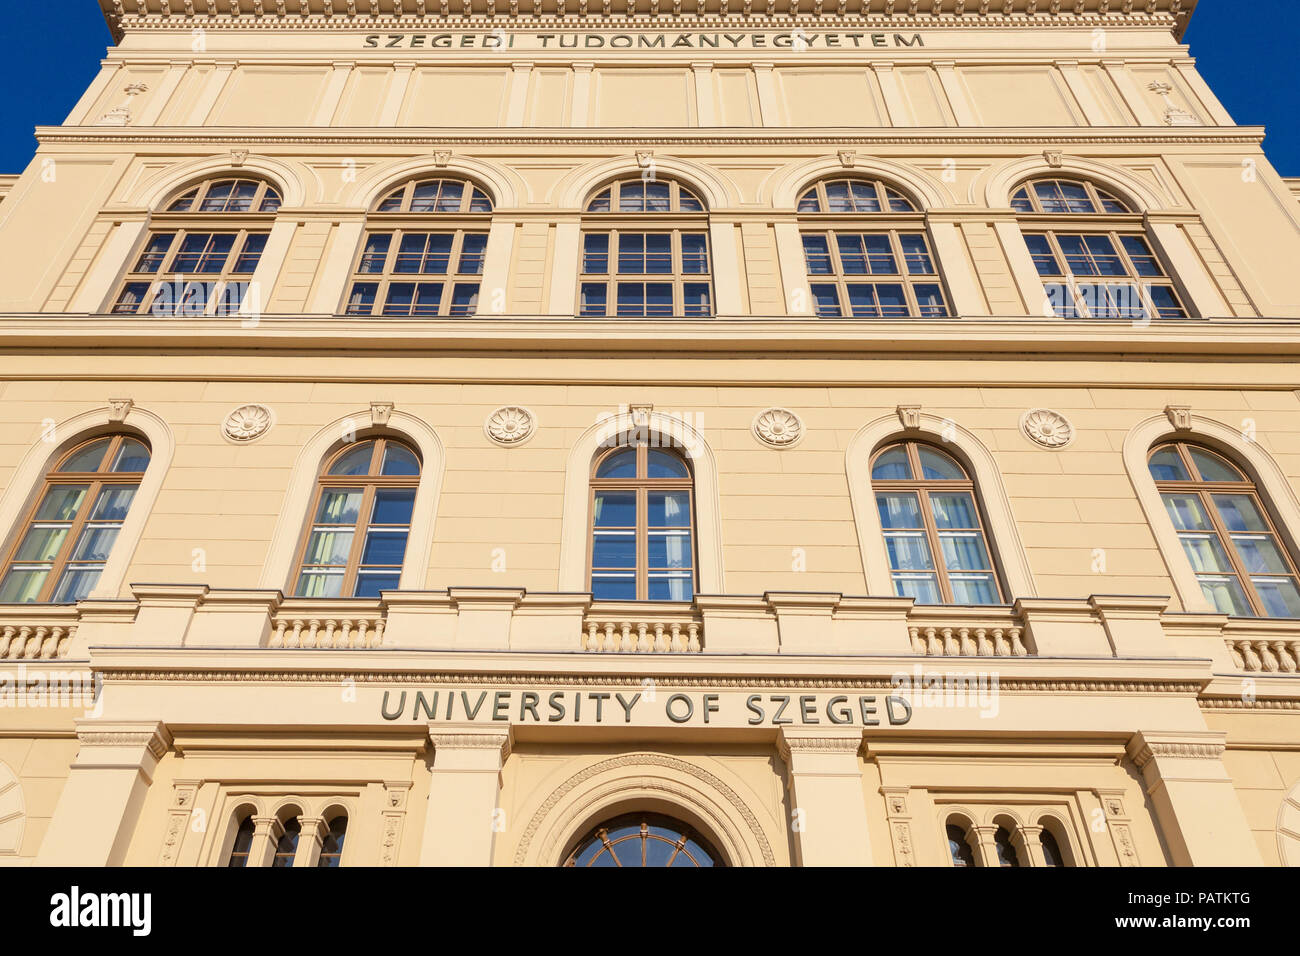 Main Building of Szeged University, on the Dugonics Ter Square, taken during a summer afternoon, with the word 'Szeged university' written on the fron Stock Photo